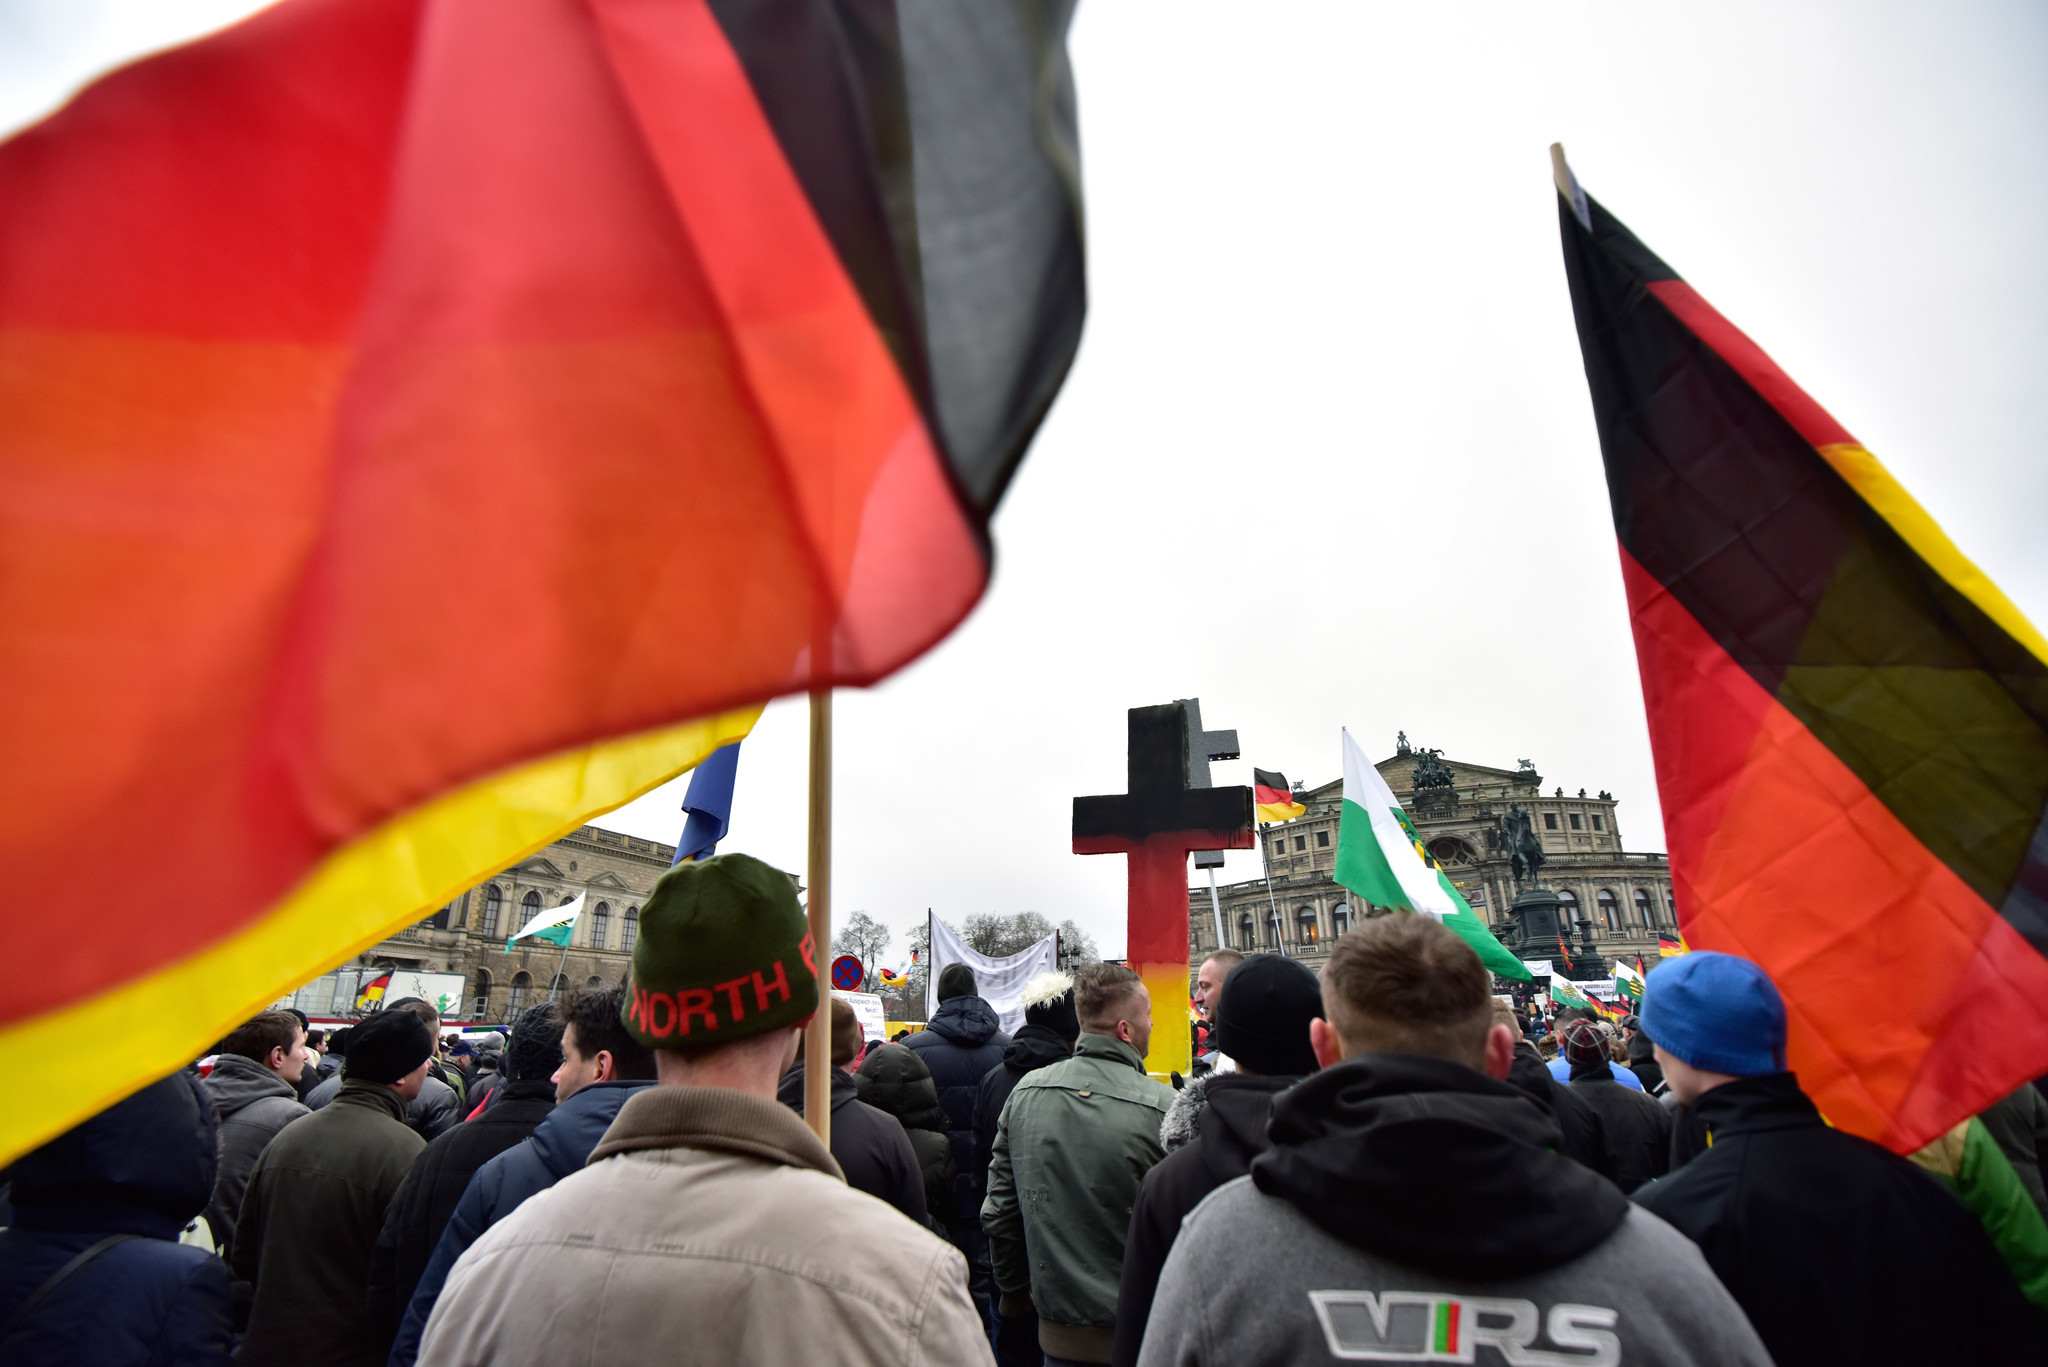 Anti-migrant group marches in Germany despite scandal